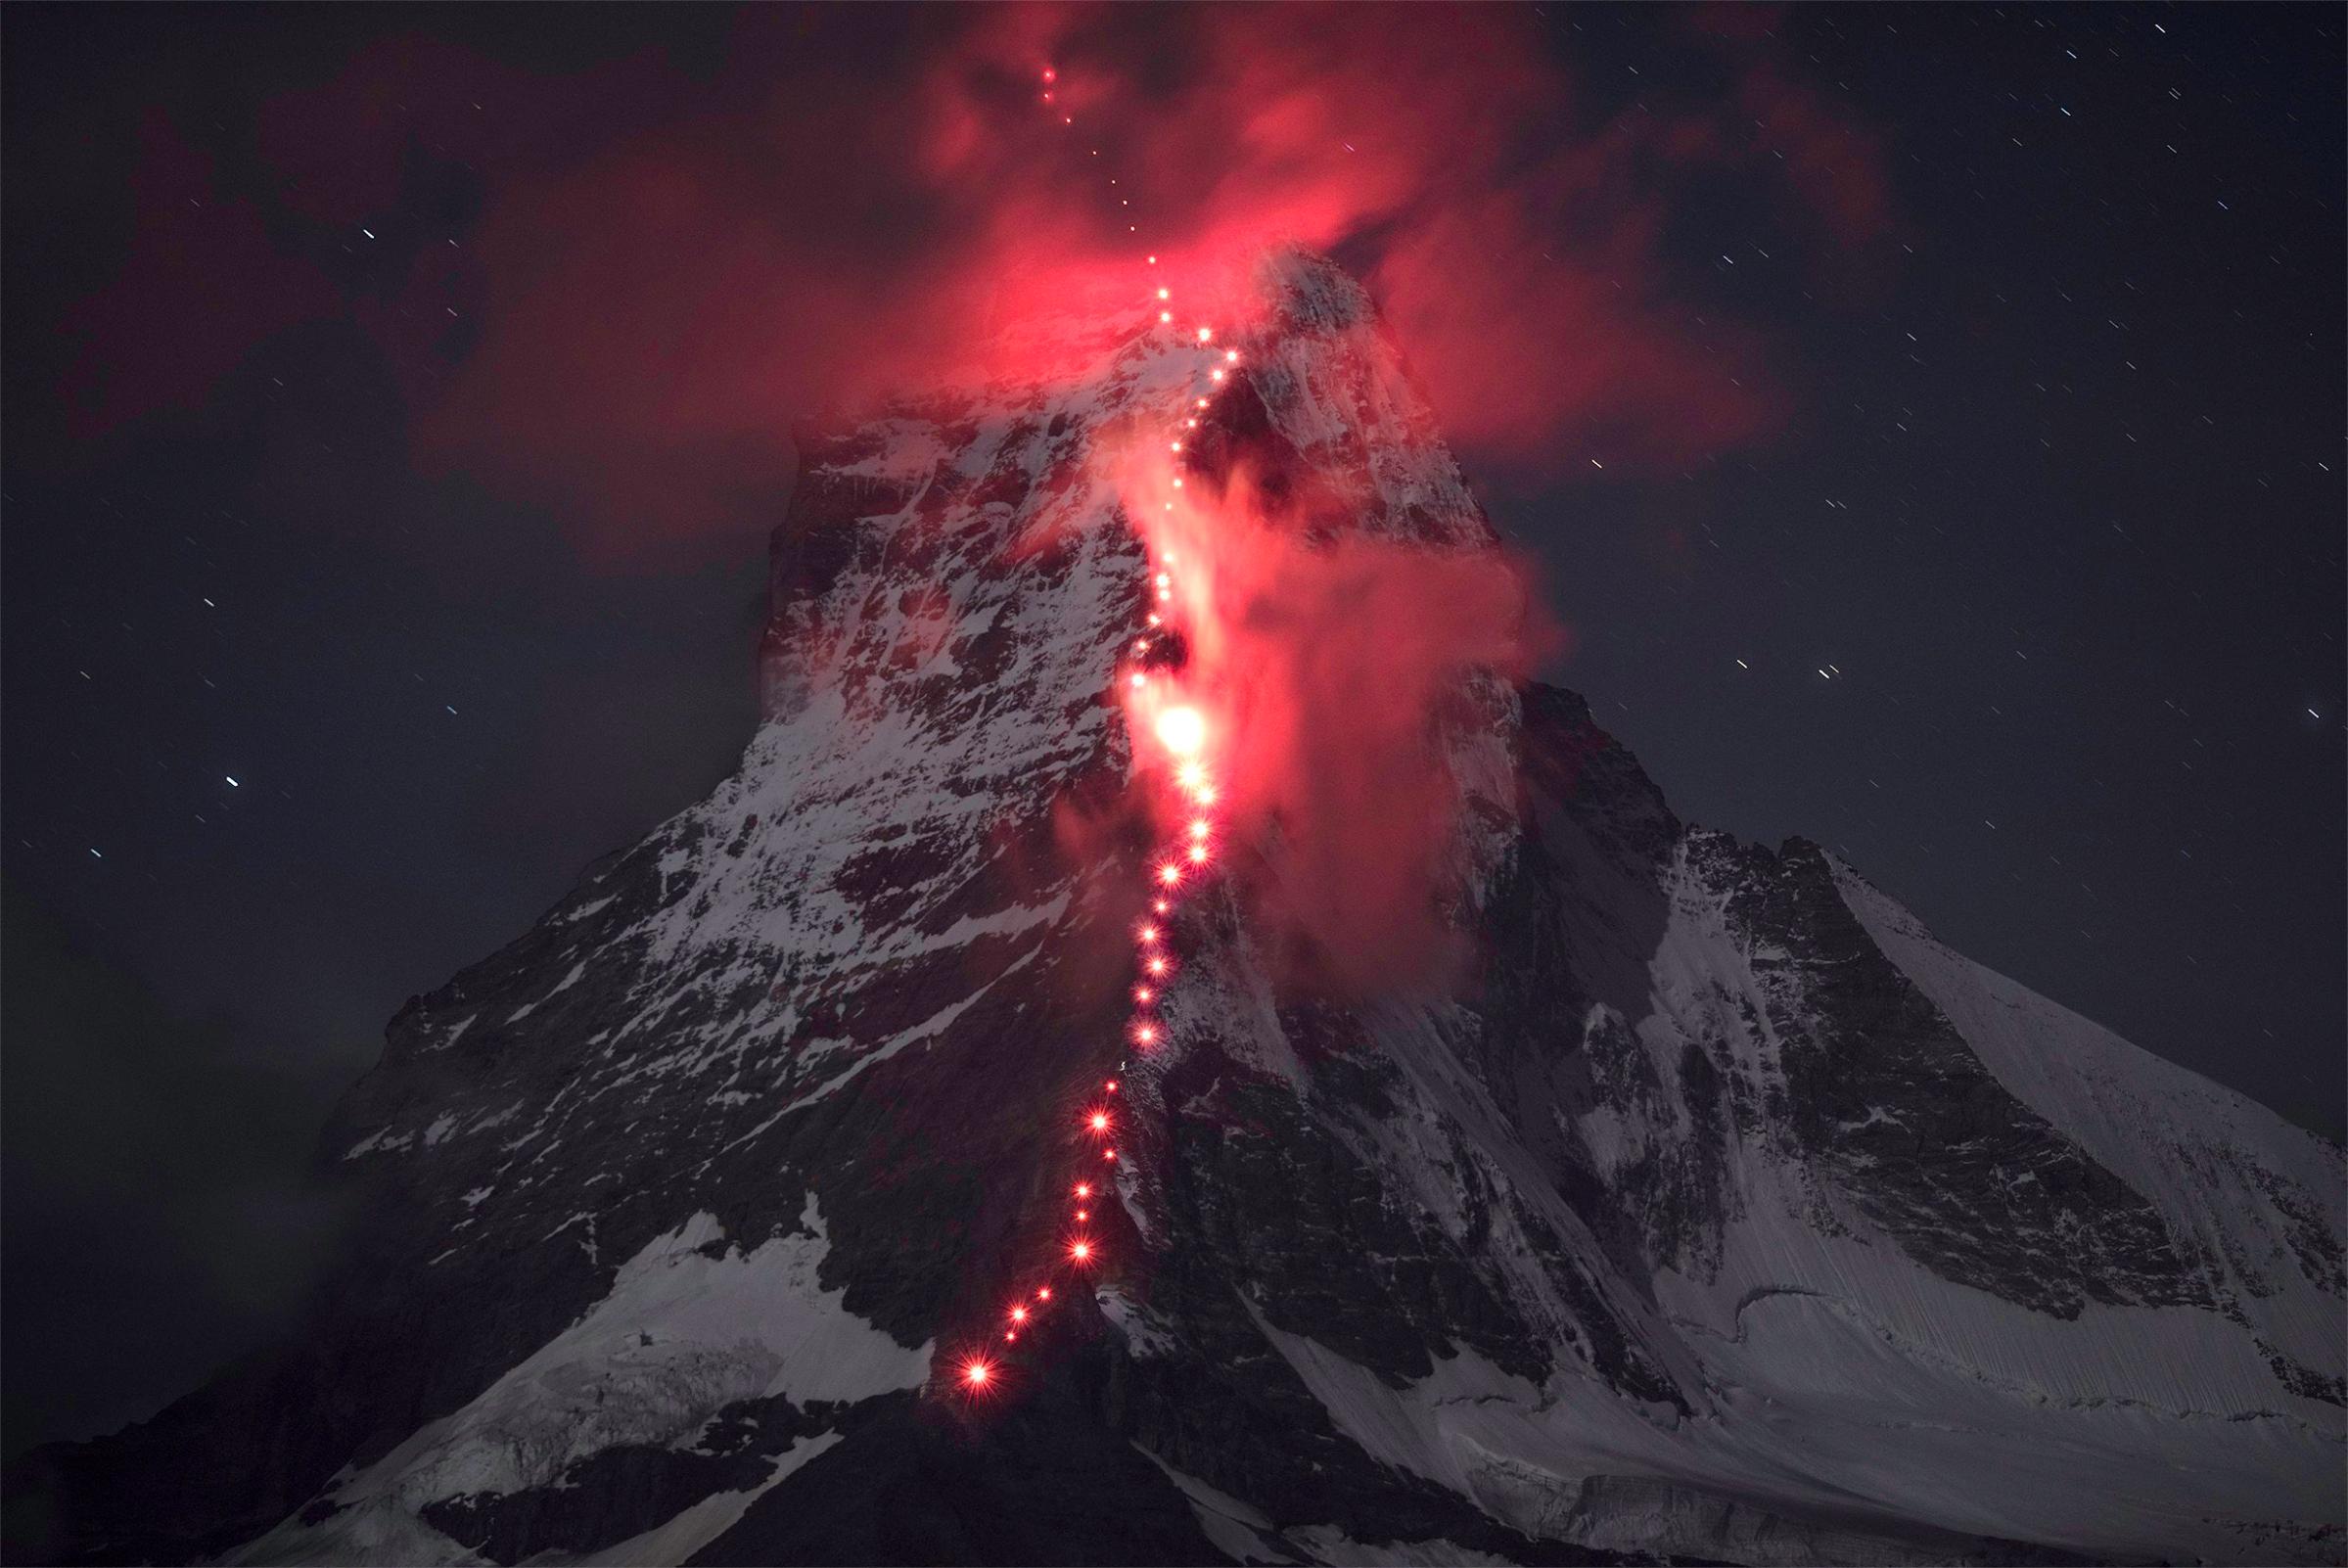 In preparation for the 150th anniversary of the first ascent of the Matterhorn, Swiss mountain sports specialist Mammut and mountain guides from the village of Zermatt transformed the spectacular summit into a shining stone icon as an anniversary gift to Zermatt on Sept. 16, 2014.